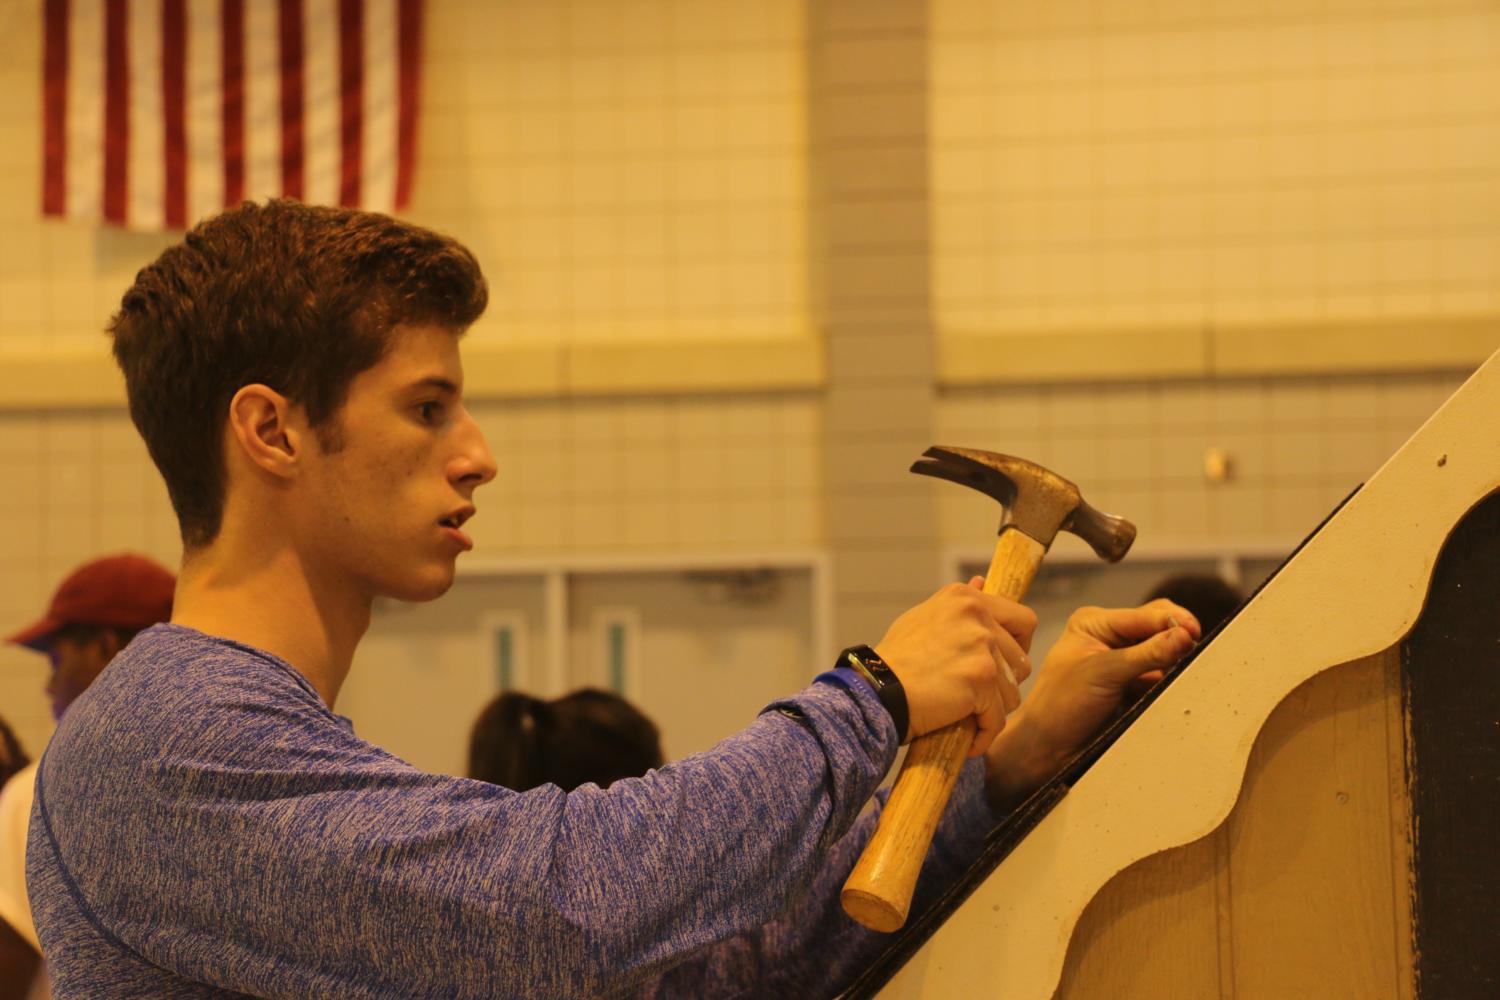 A senior helps to hammer shingles into his grade’s playhouse on Sept. 13 in the fieldhouse. He is able to work quickly, willingly and doing any job that needs to be done. The senior’s “SING!” playhouse is well thought out and made by a great group that works as a team really well.